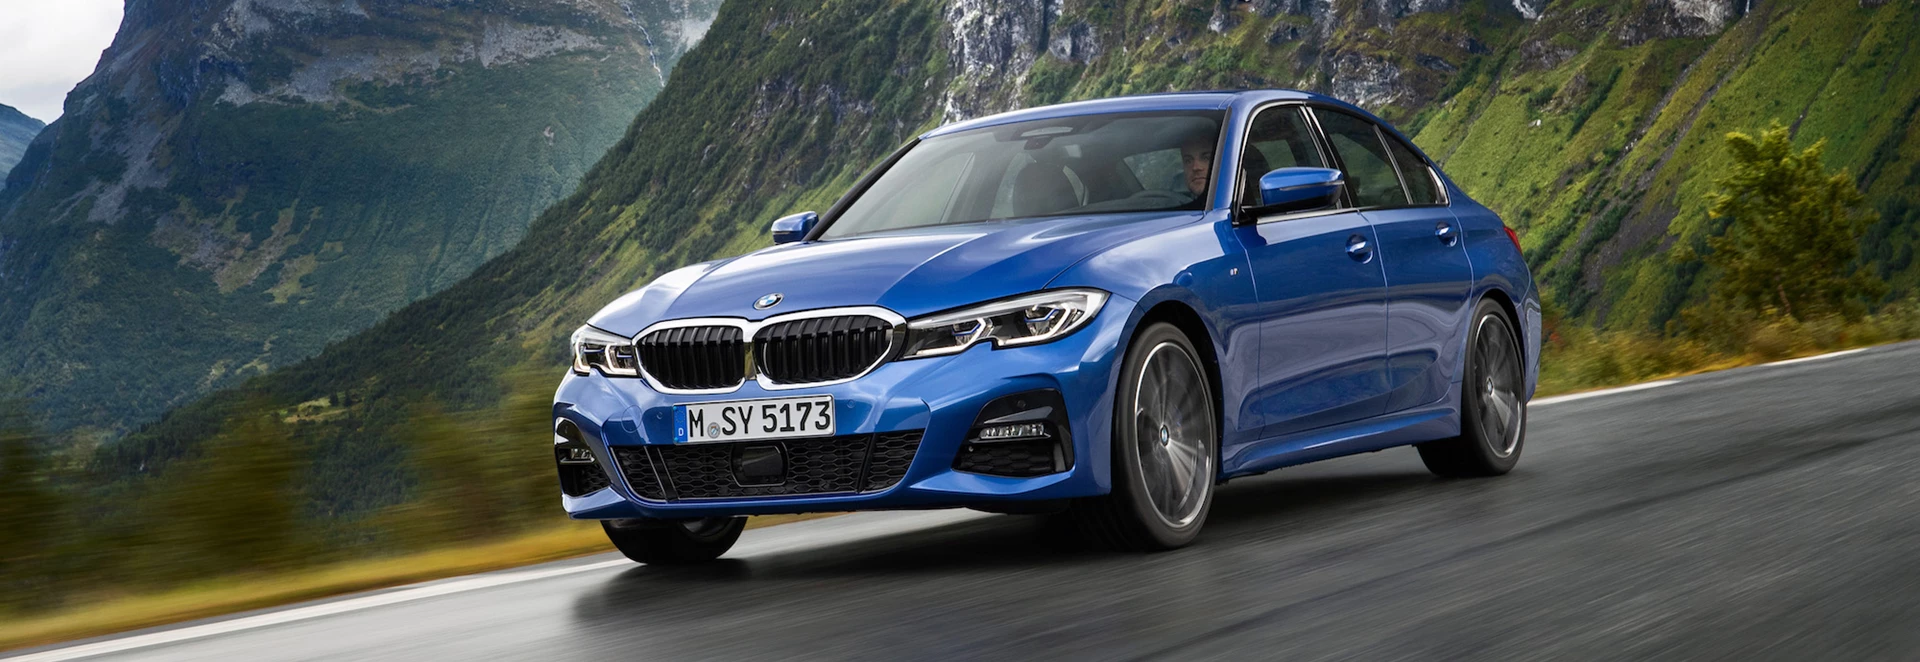 5 features not to be missed on the new BMW 3 Series 